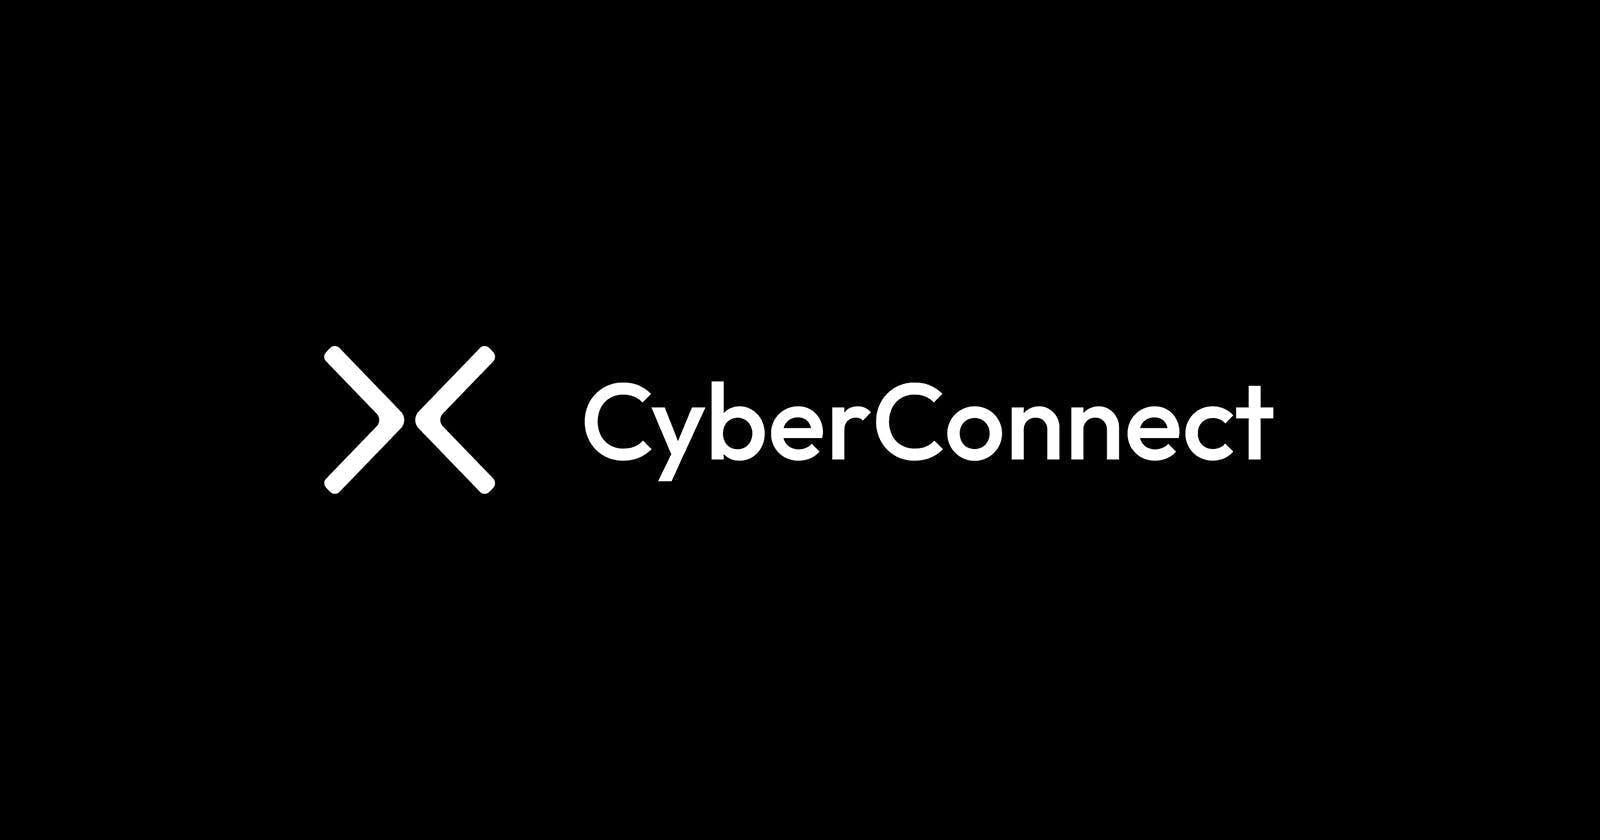 Overview and Use cases of Cyberconnect